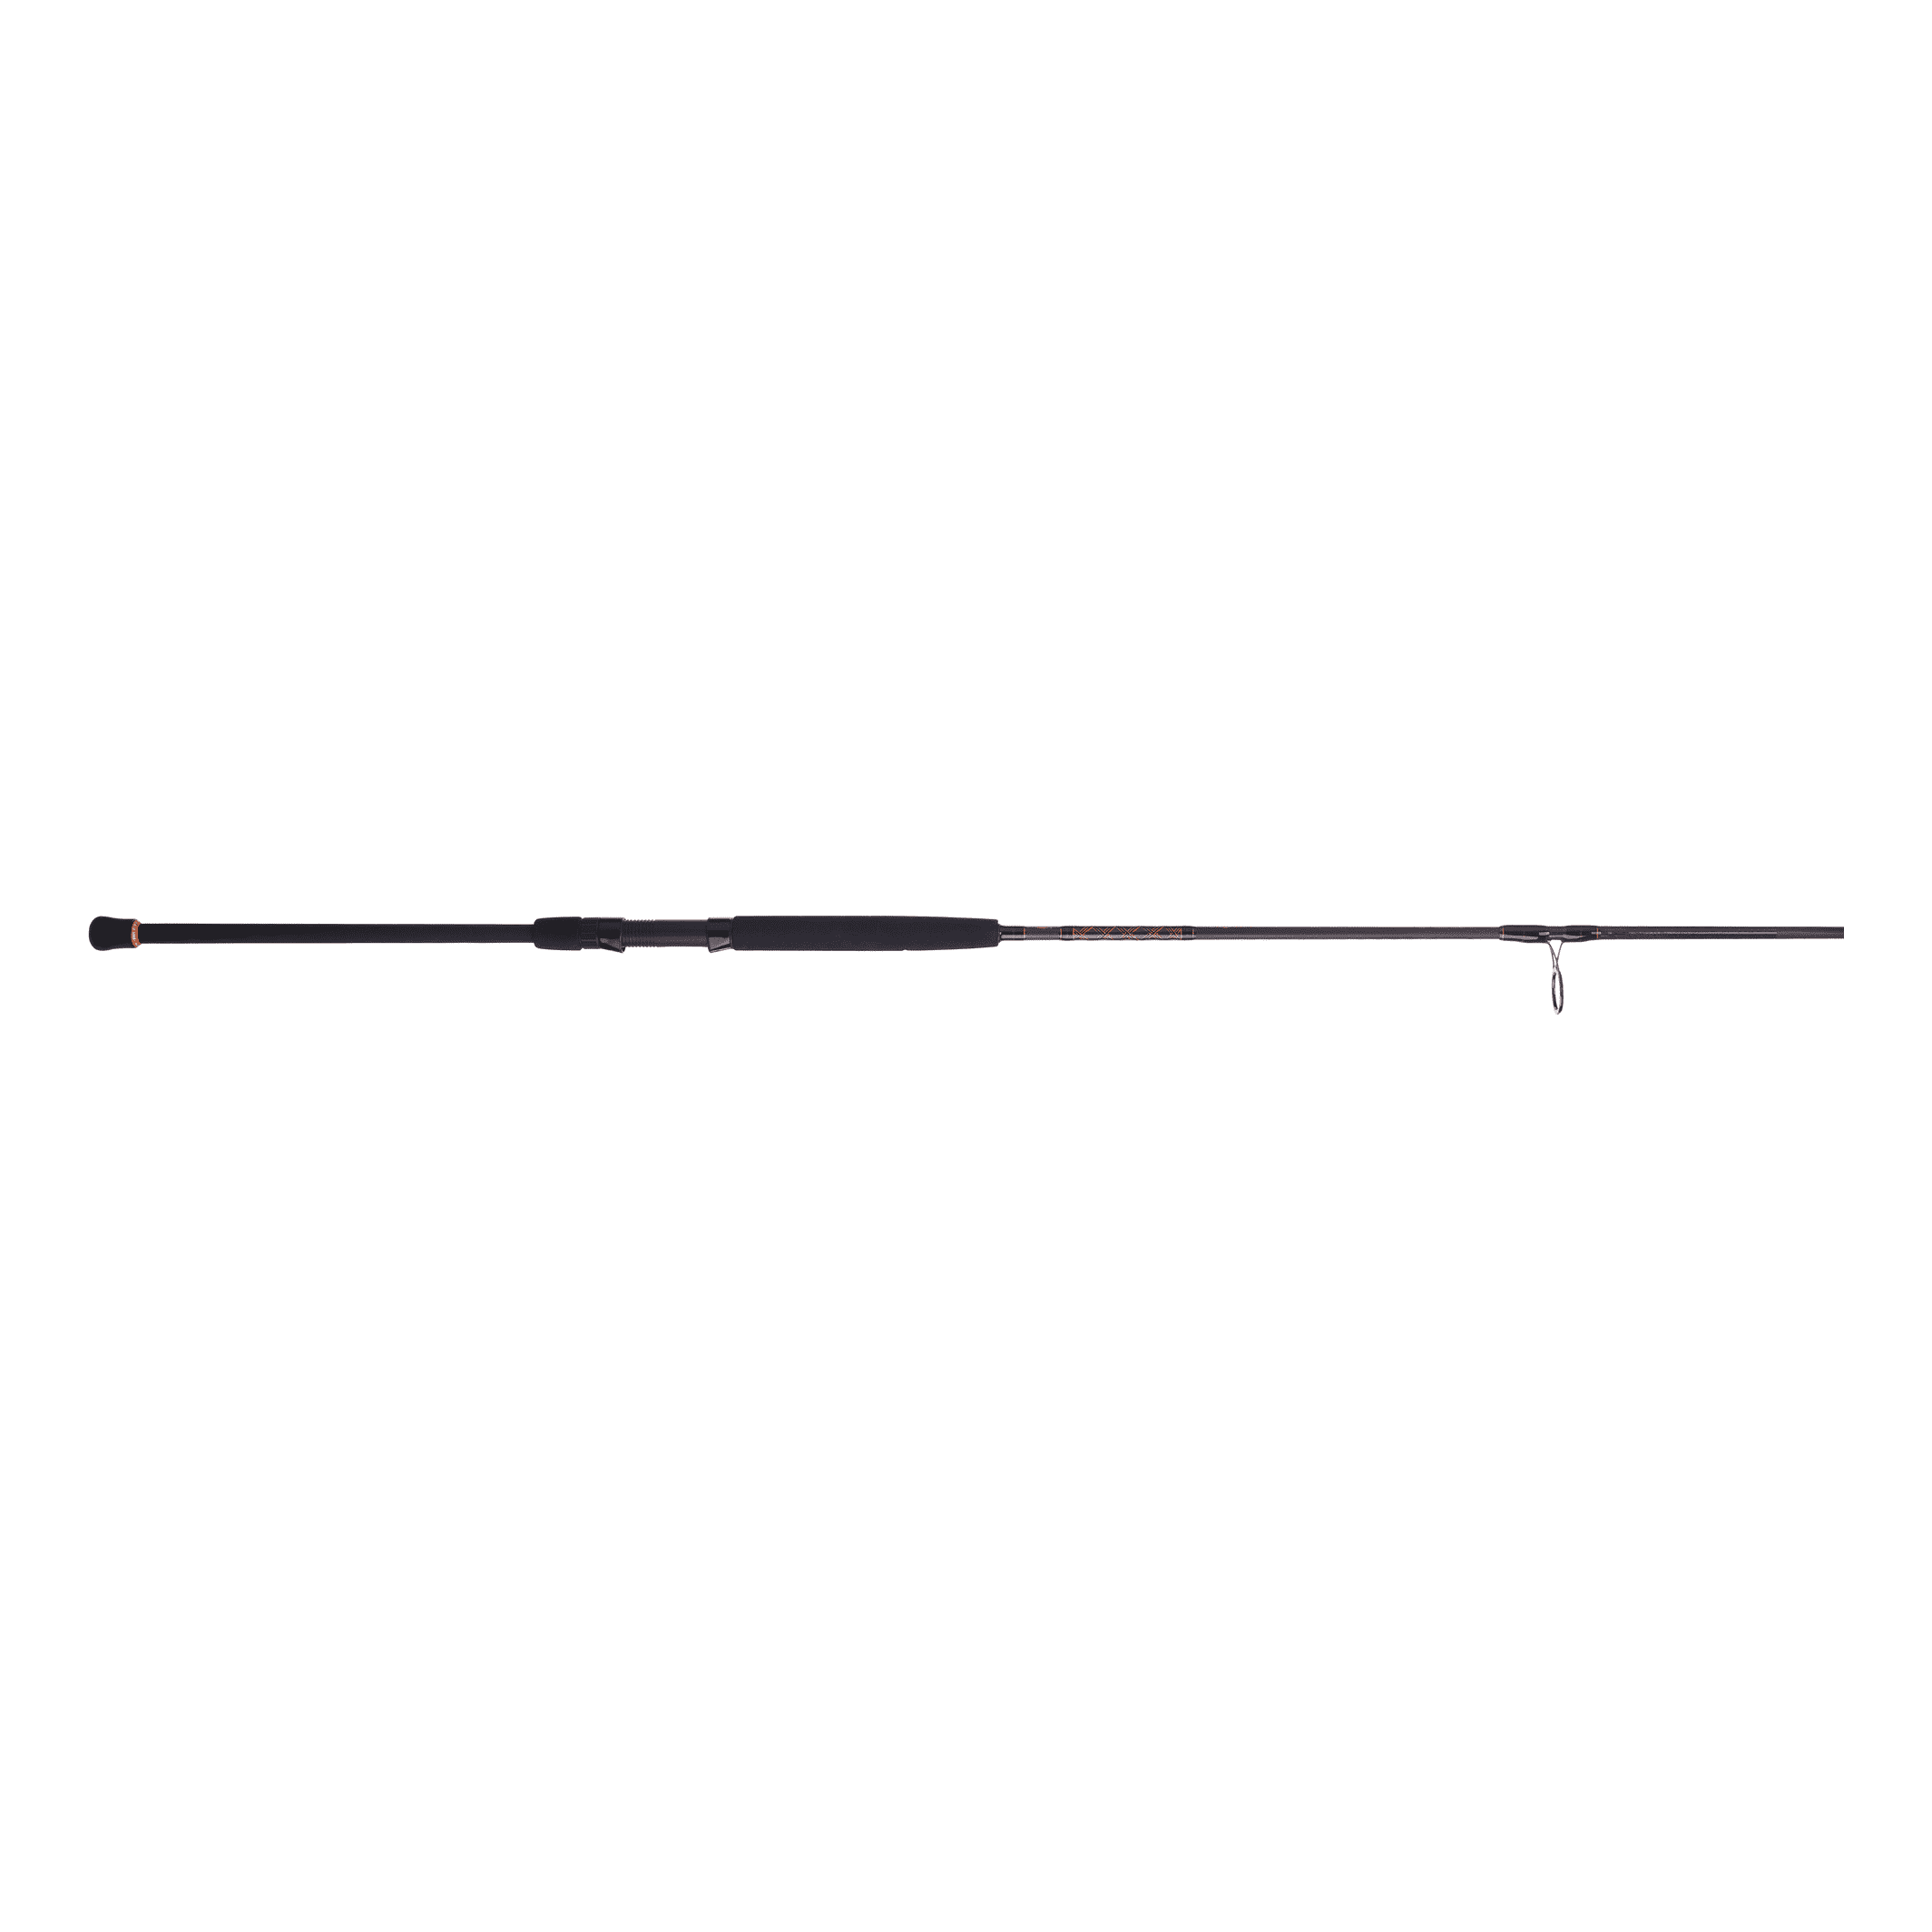 Penn Pursuit II Rods  Curbside Pickup Available at DICK'S